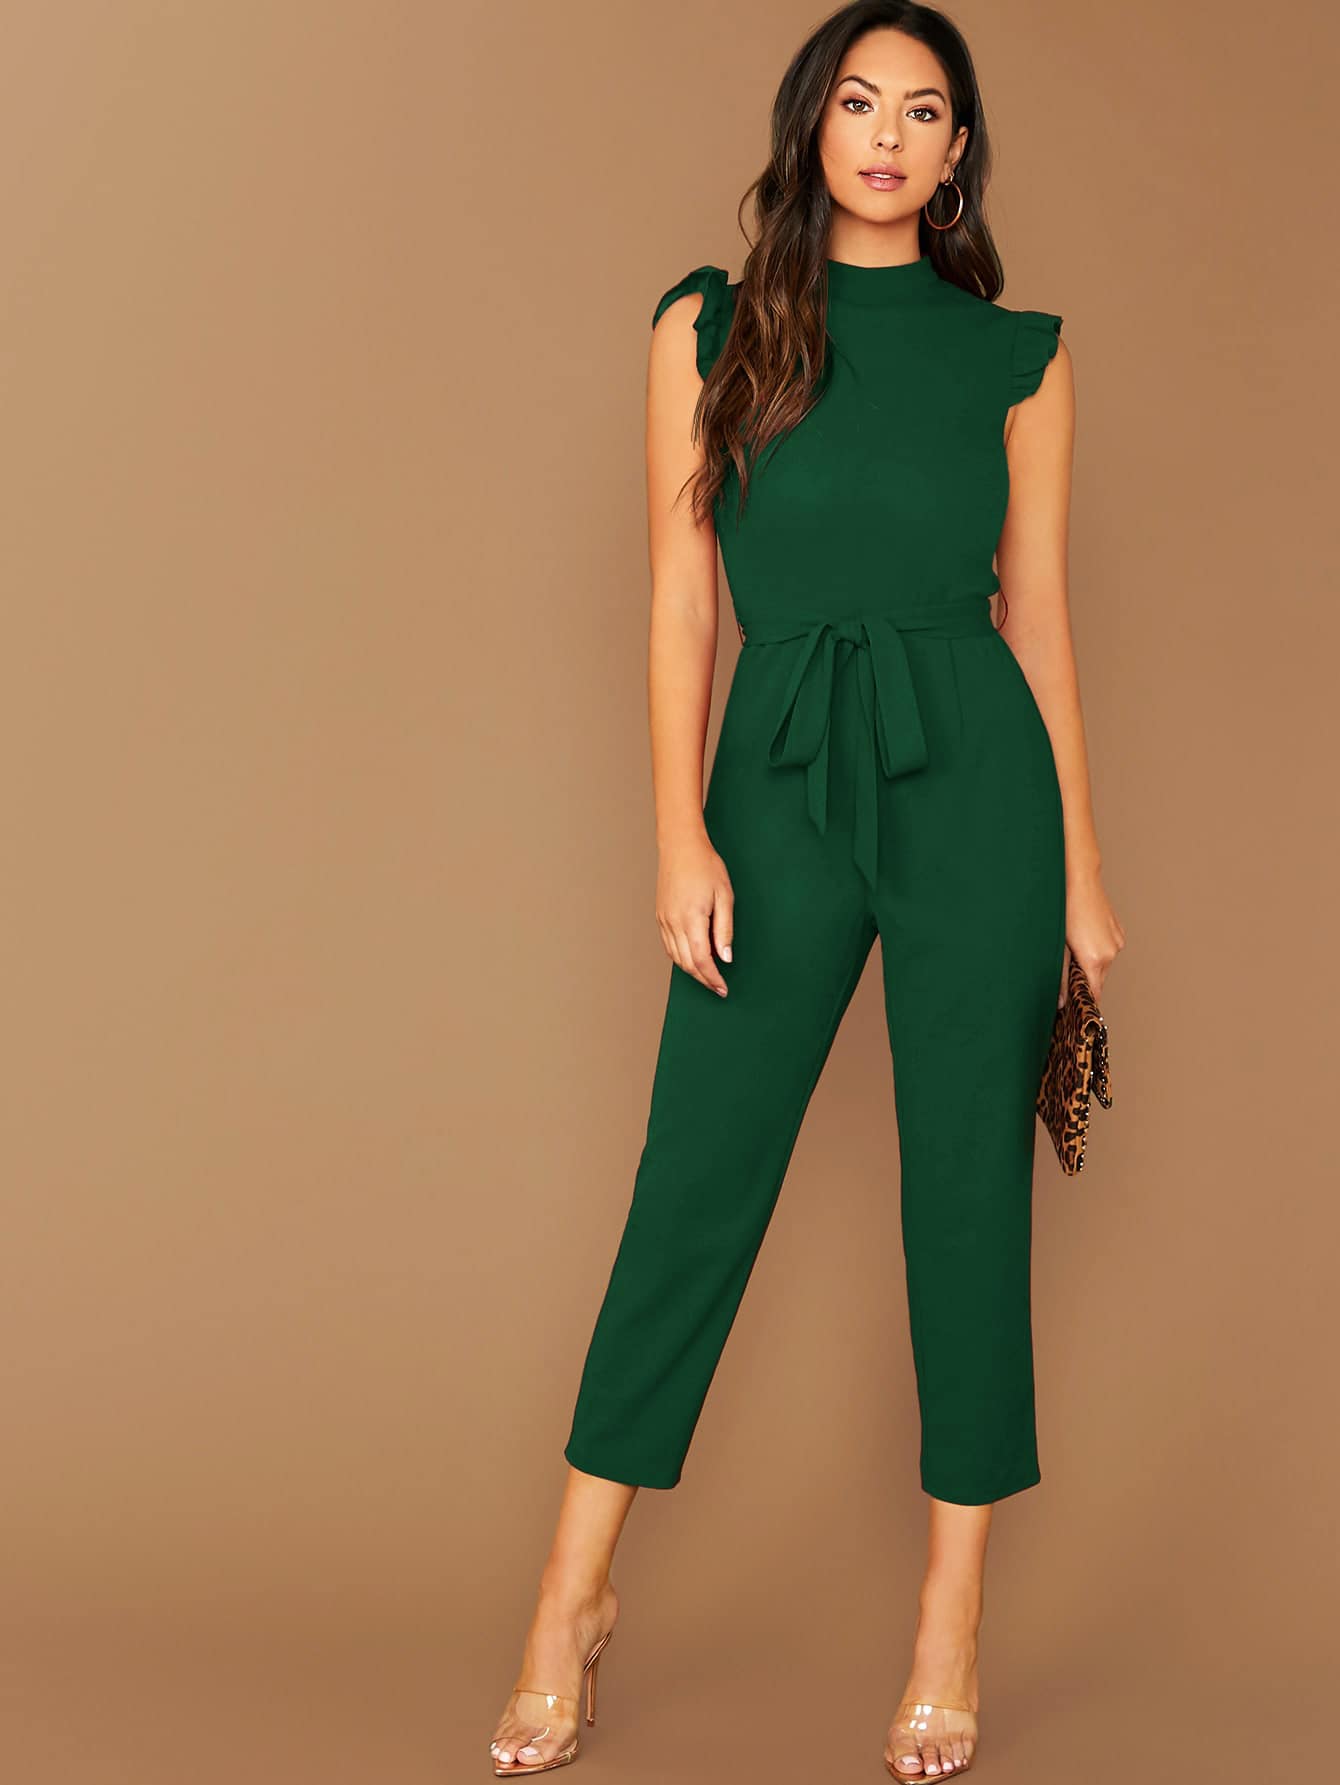 LLstyle Unity Mock-Neck Ruffle Cuff Self Belted Jumpsuit